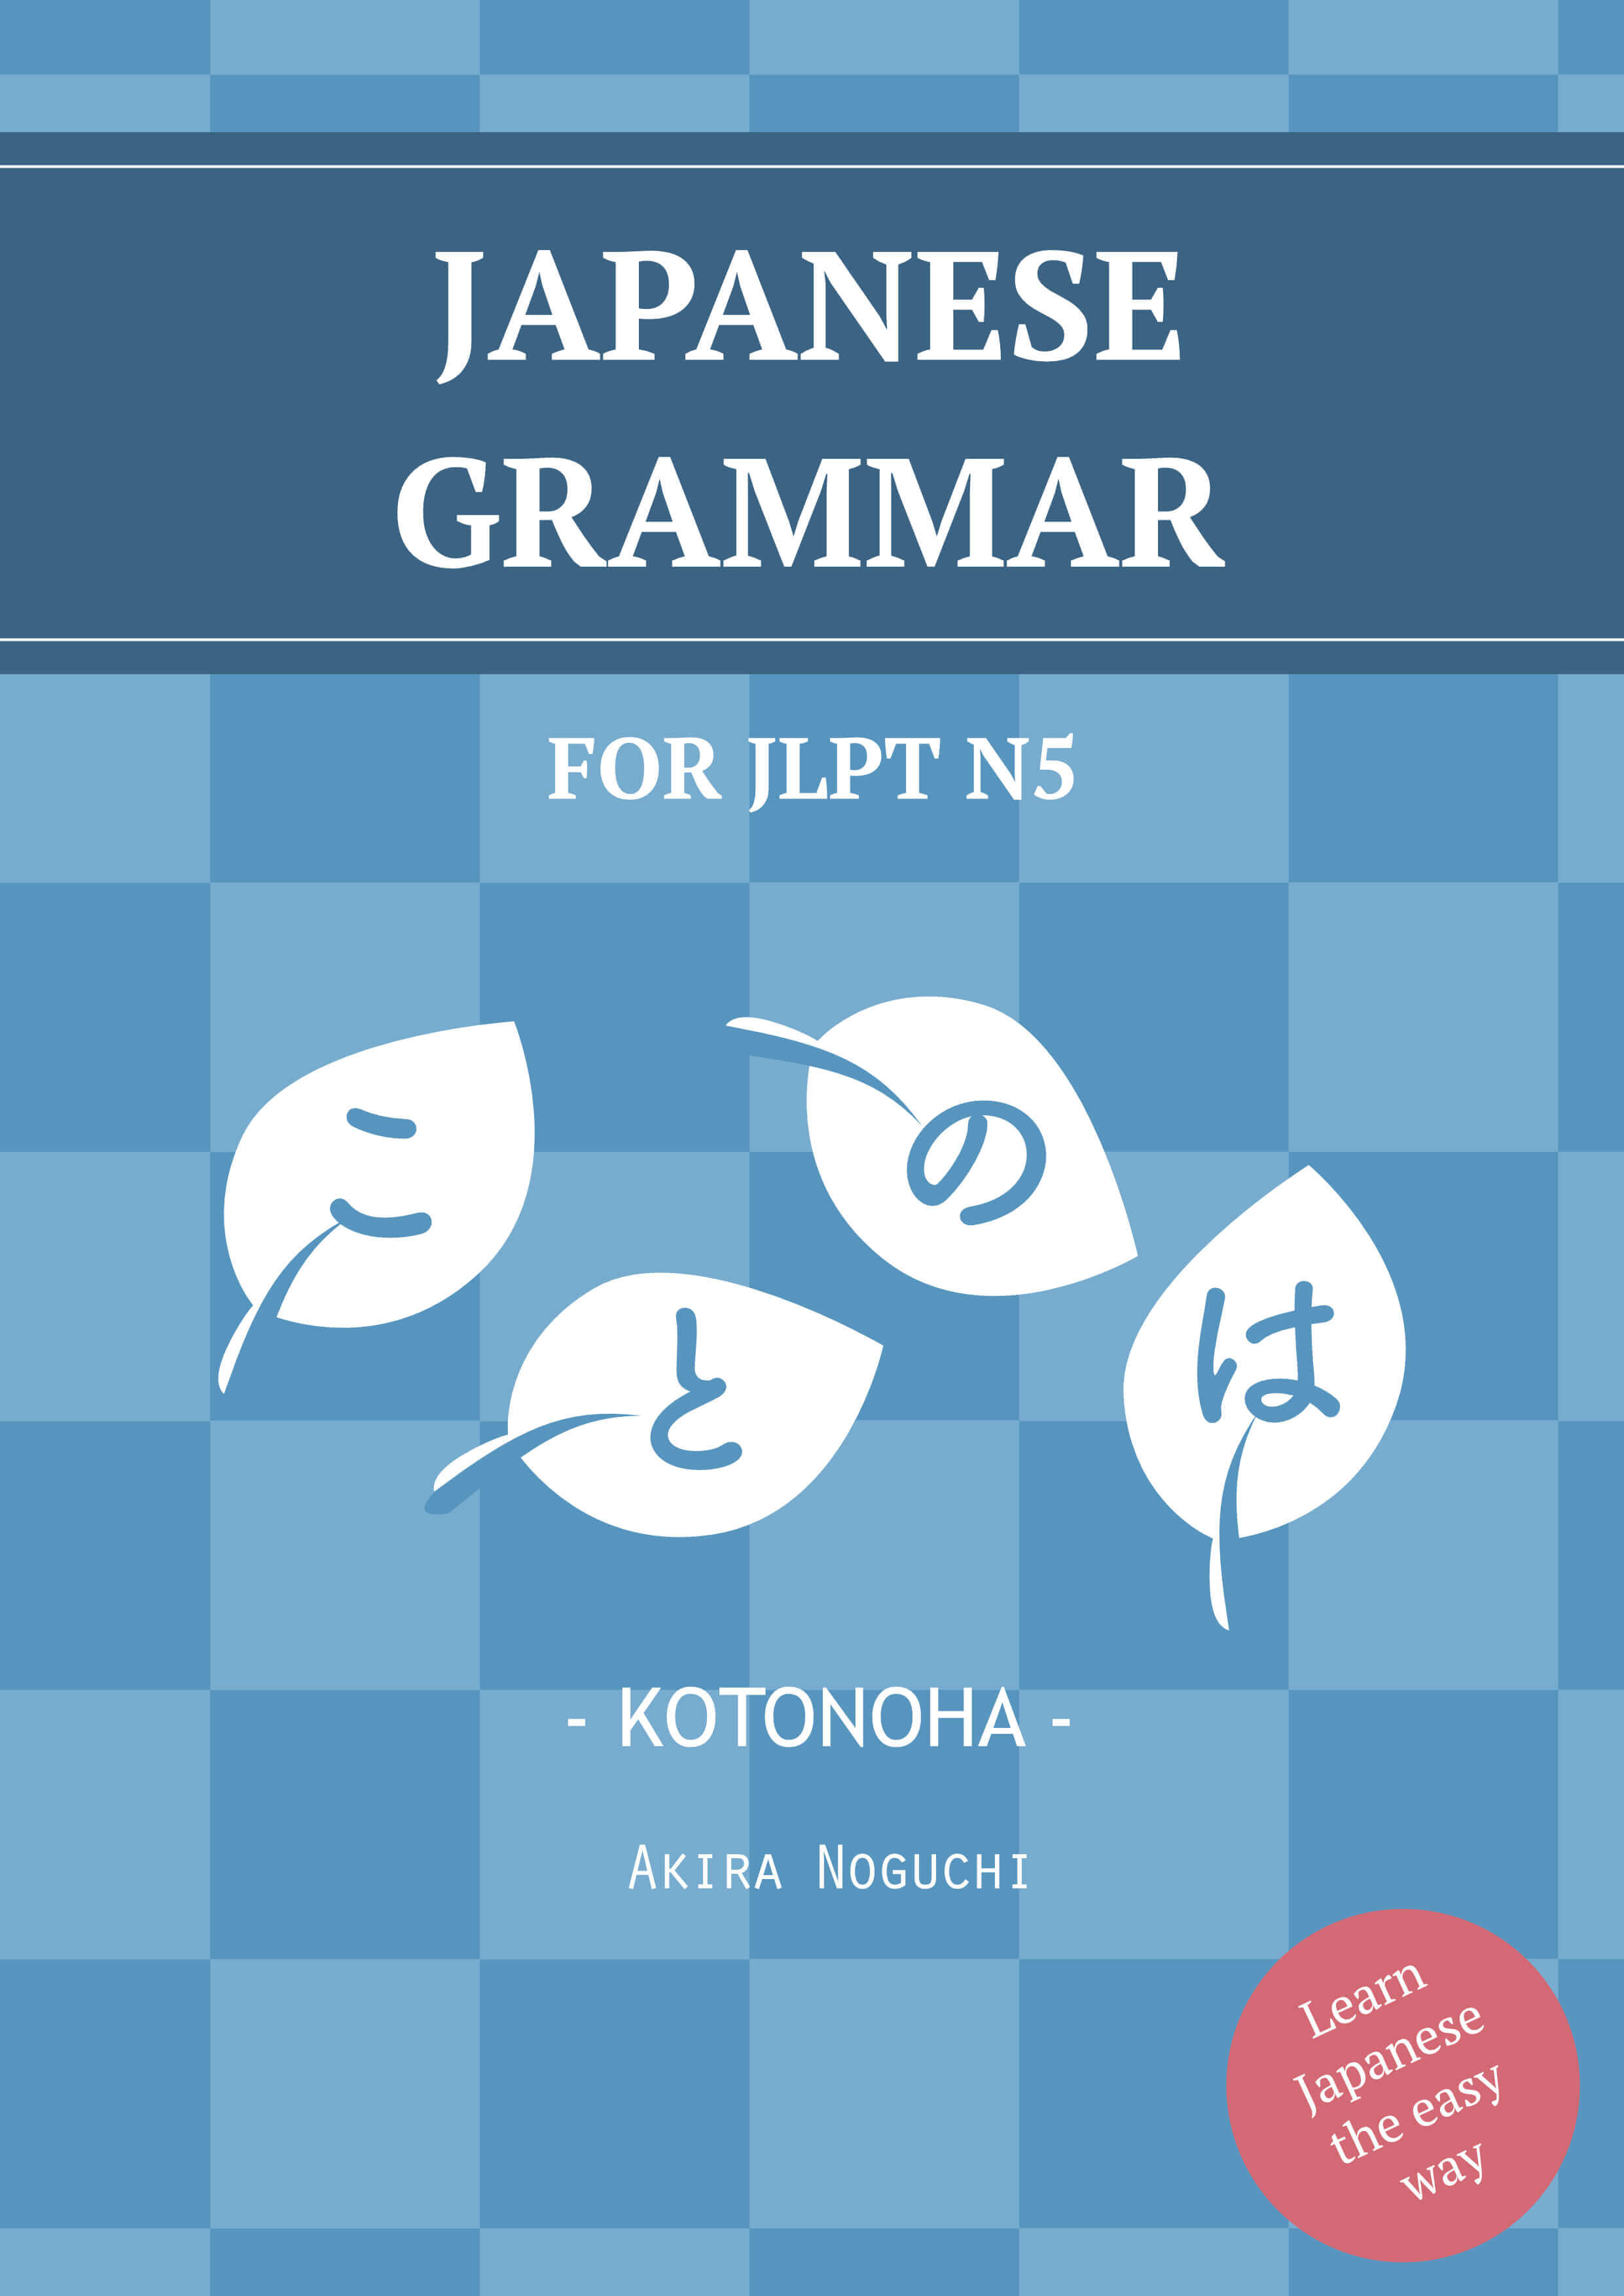 New Gramamr Book for N5